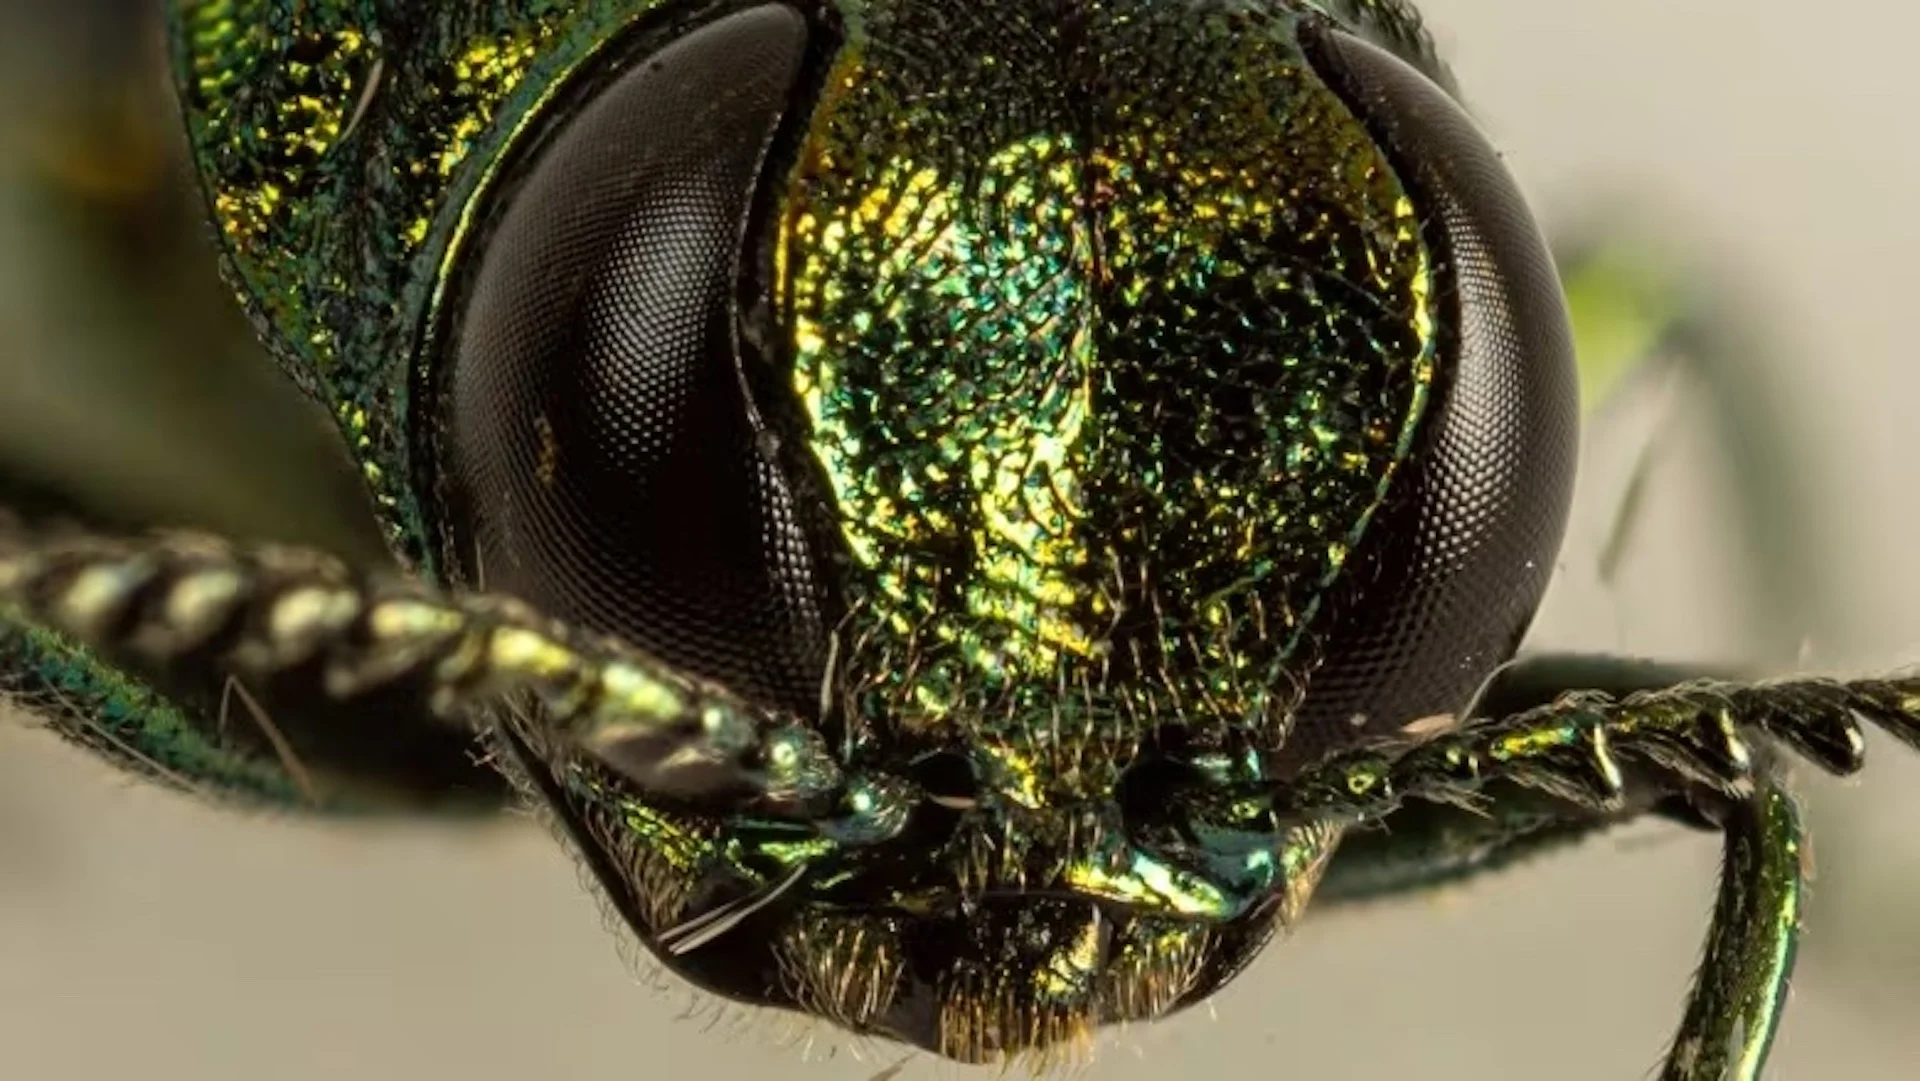 Emerald ash borer spread in Winnipeg slower than expected: Researcher, advocates